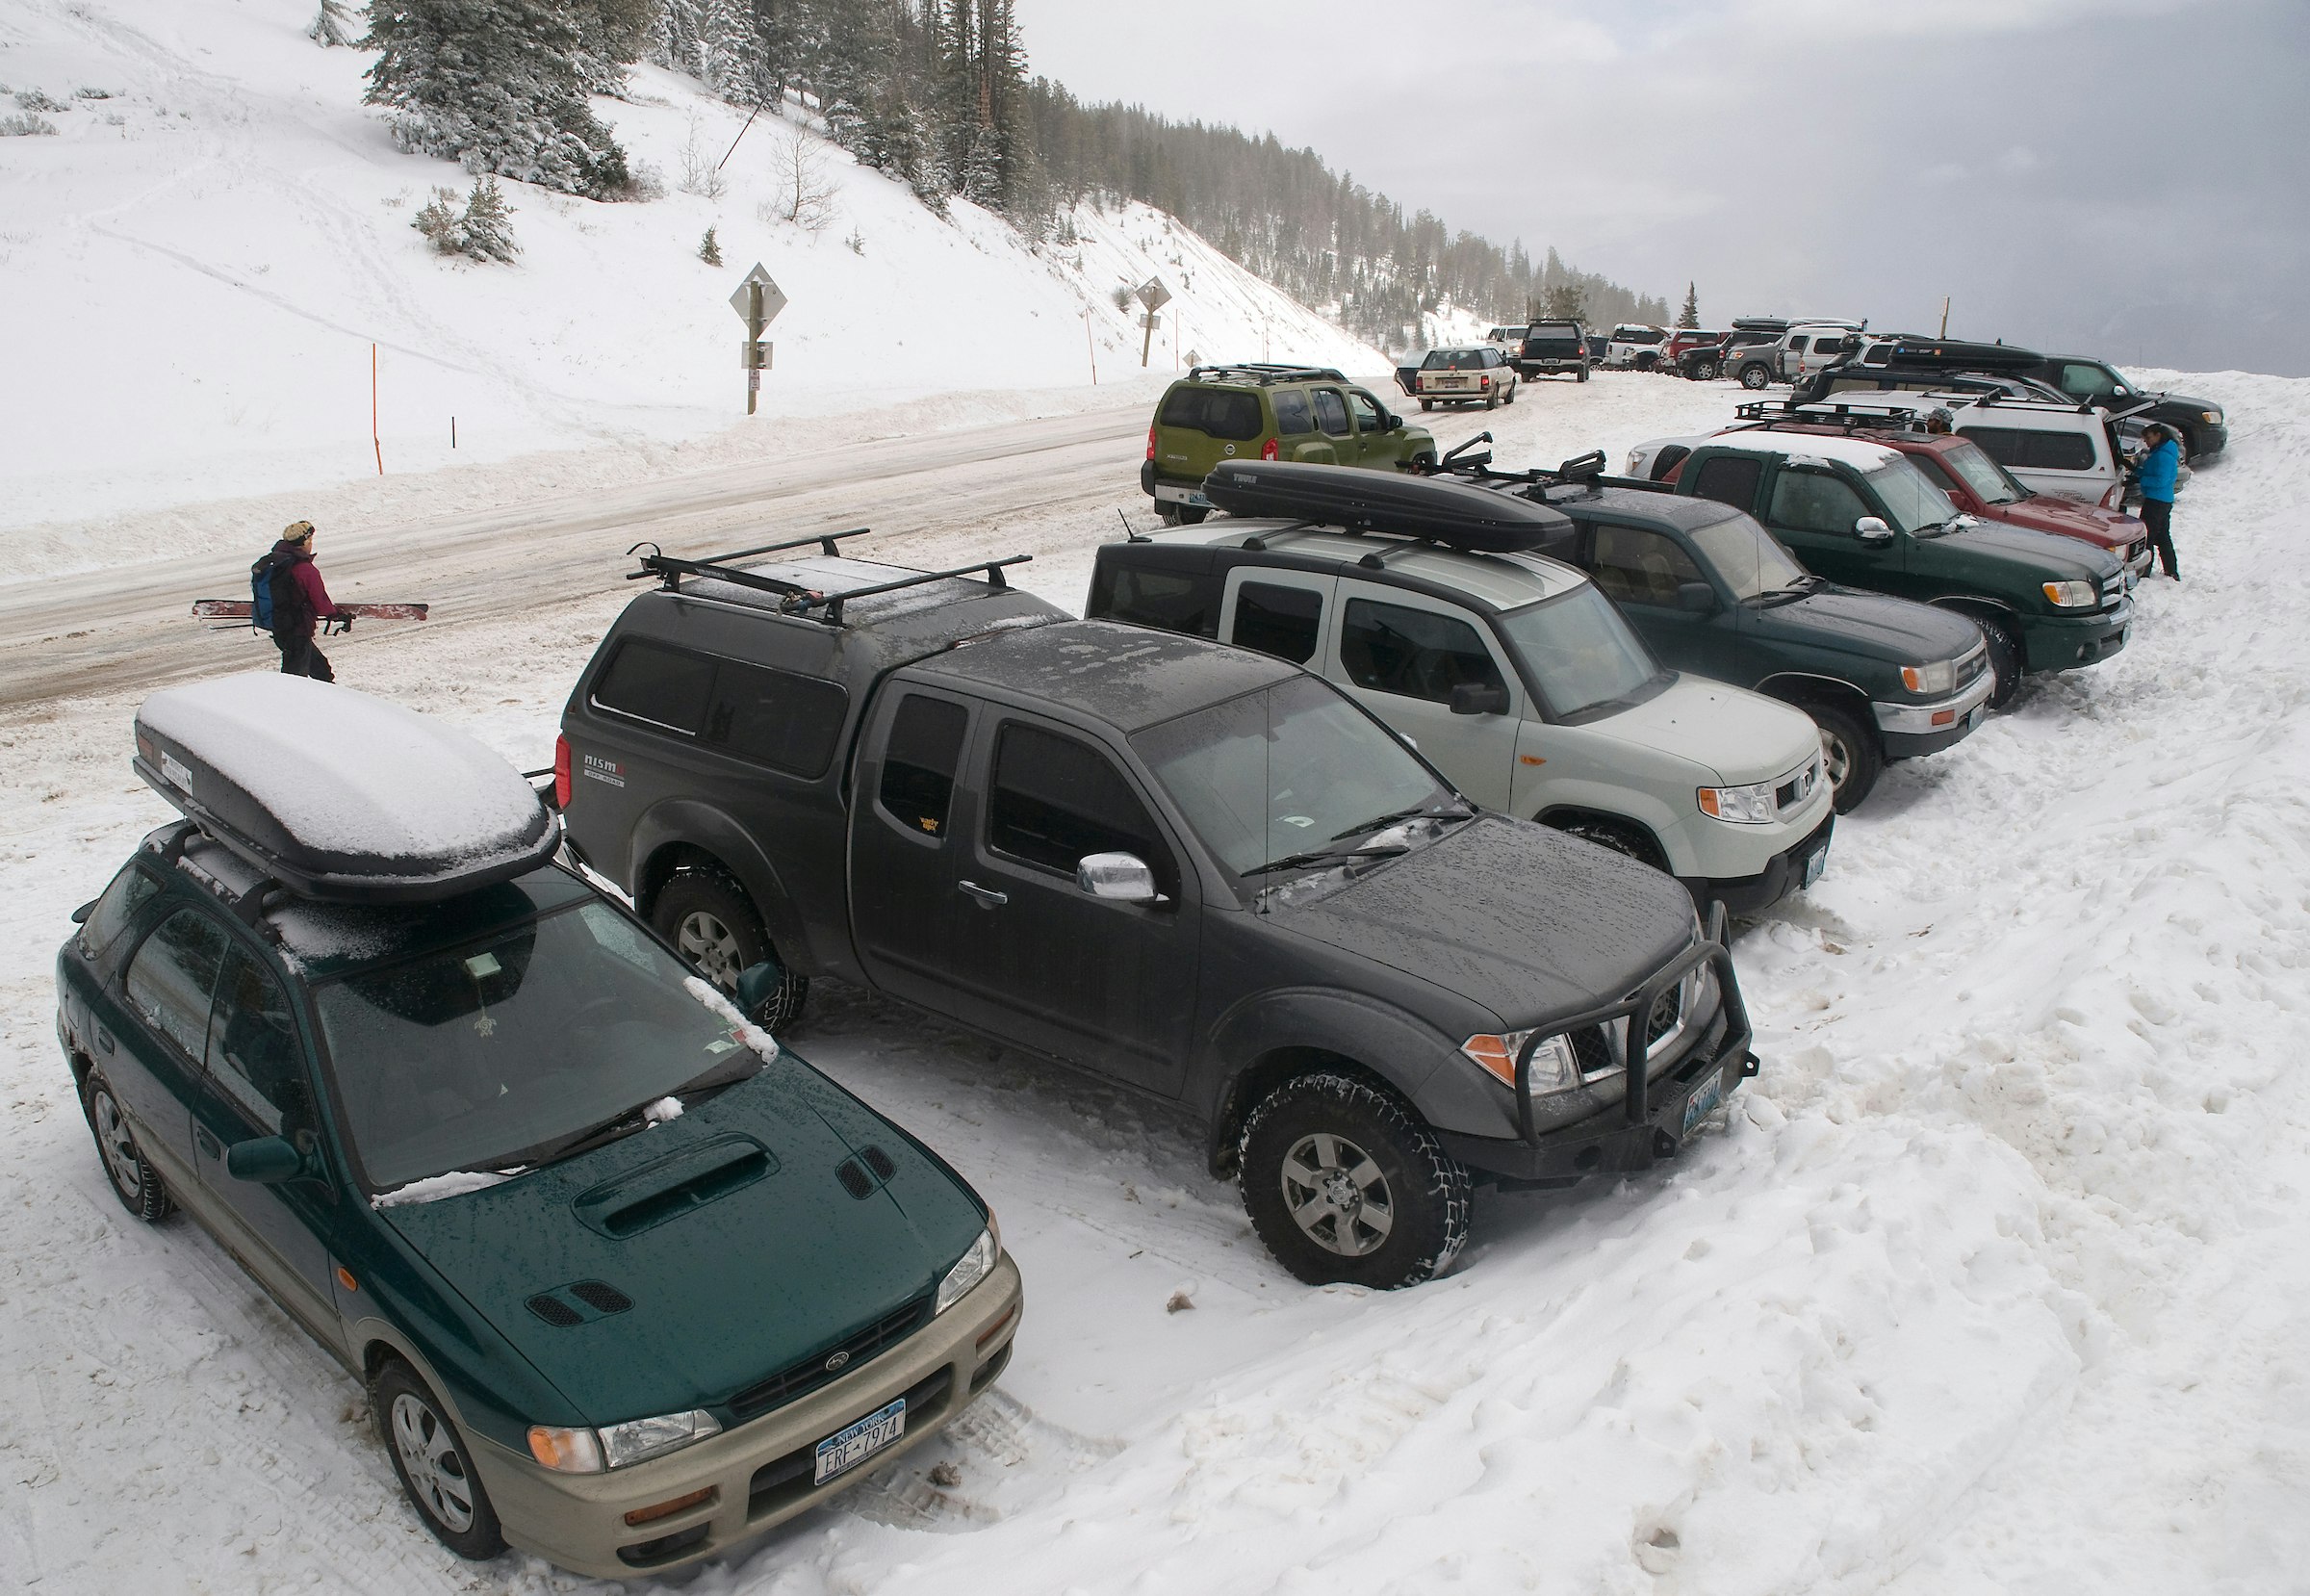 A row of parked cars stretches as far as the eye can see on a snow-covered road